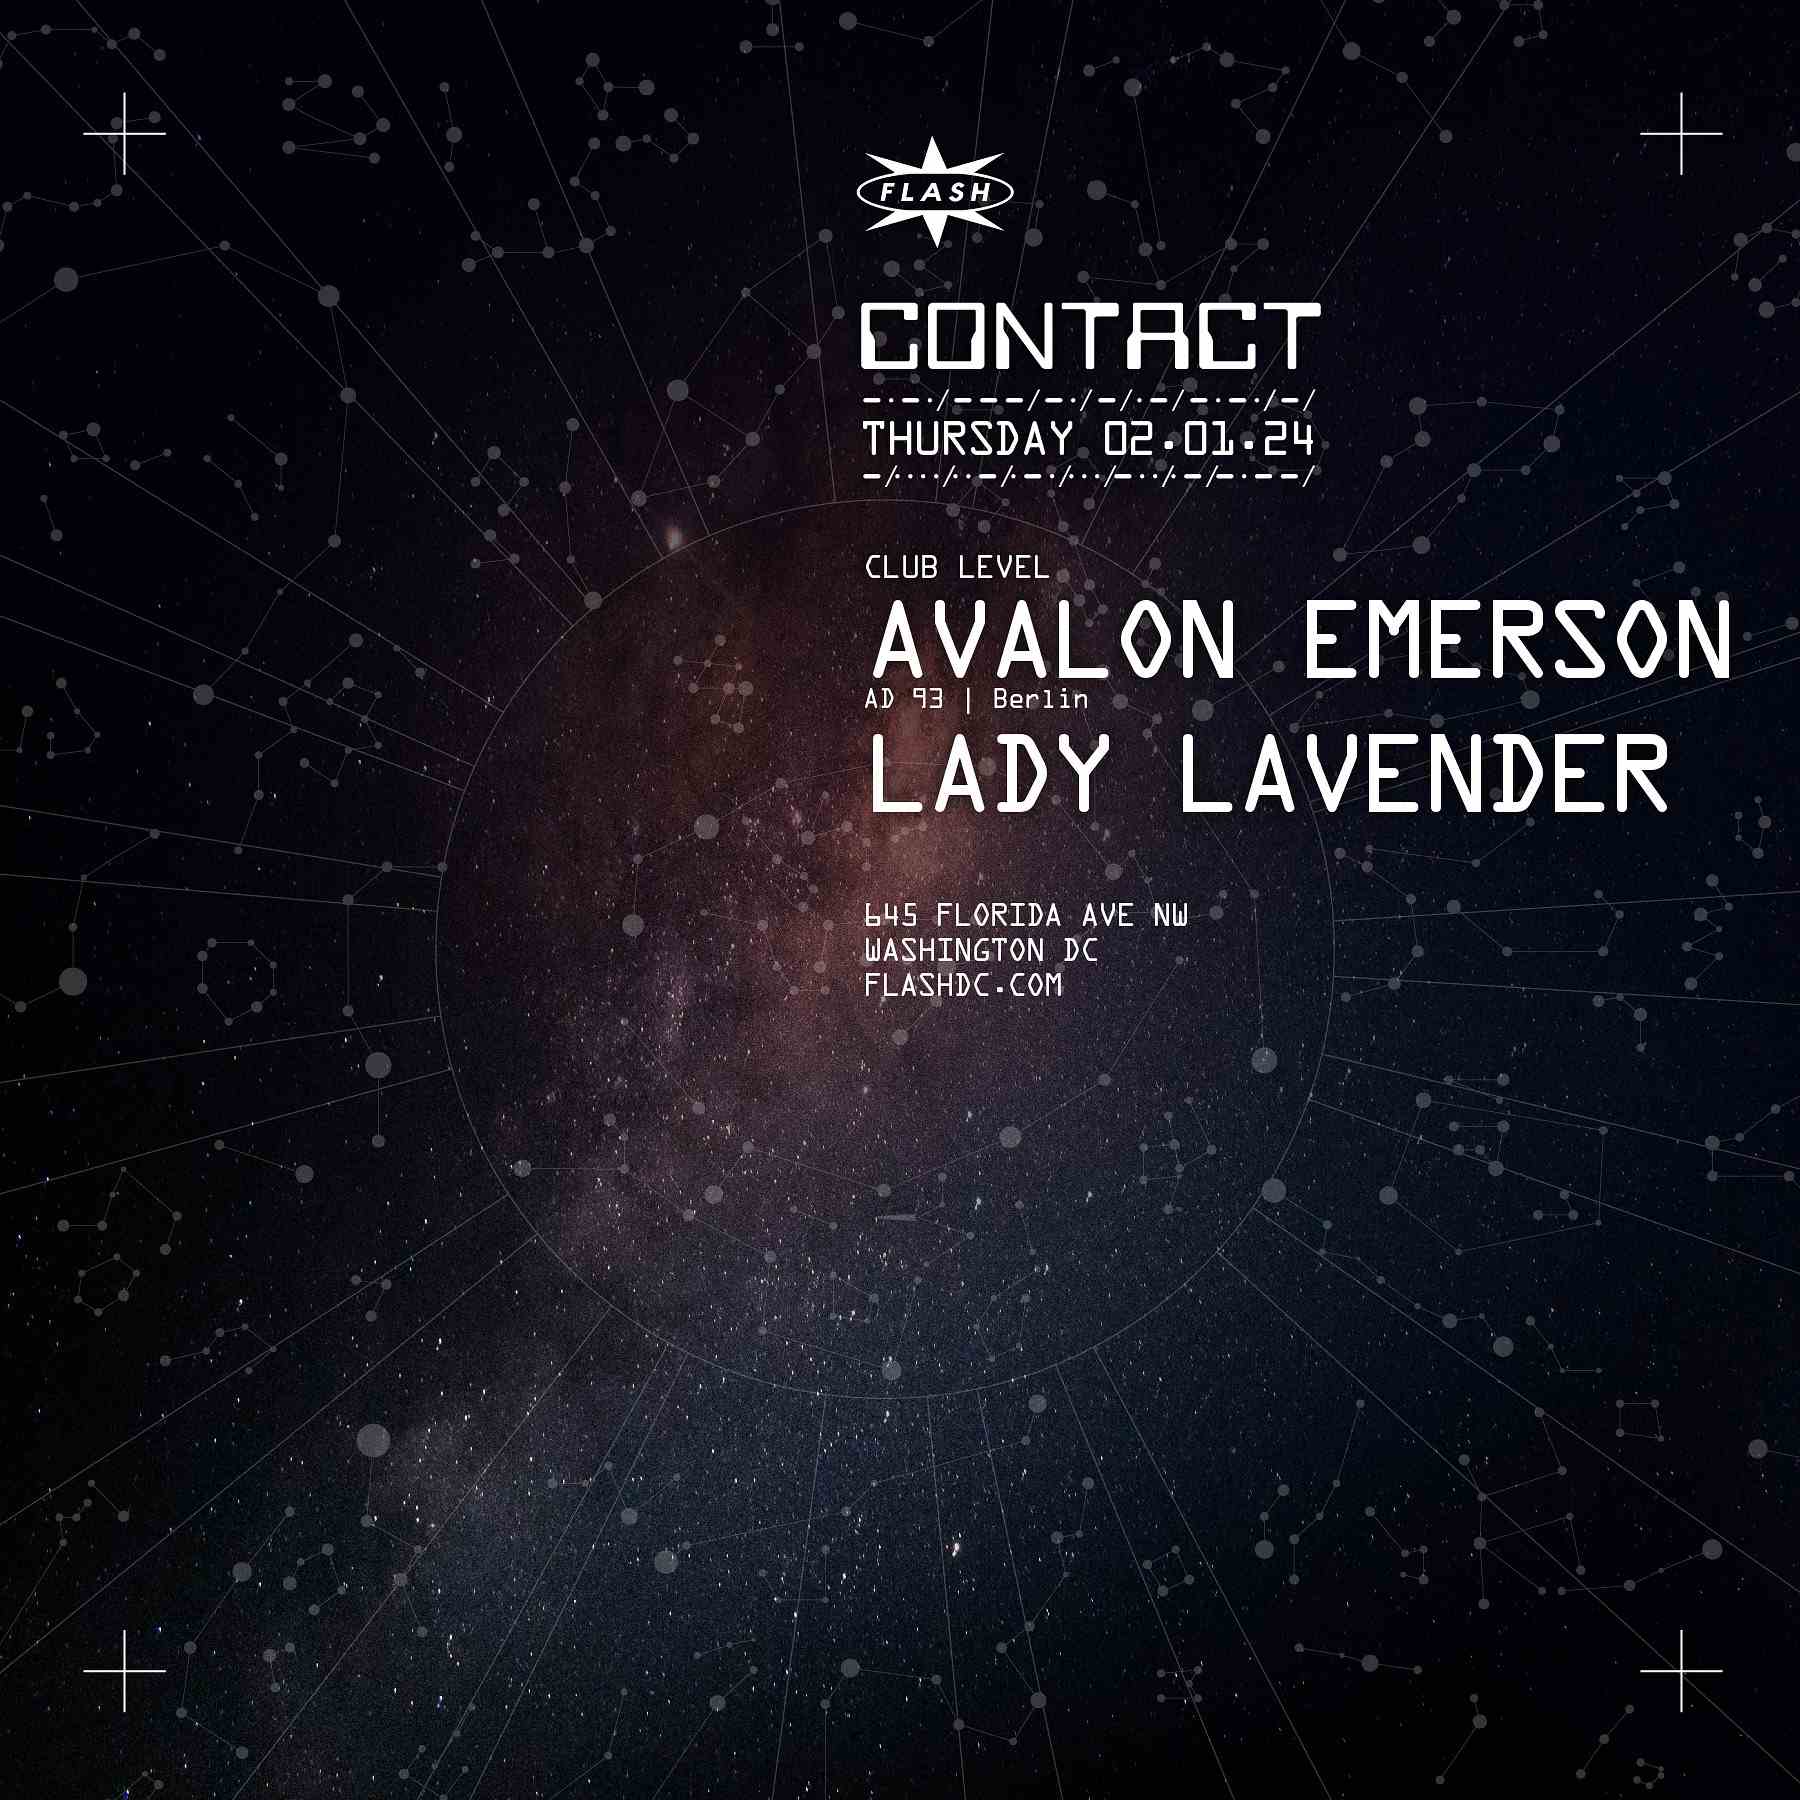 CONTACT: Avalon Emerson event flyer